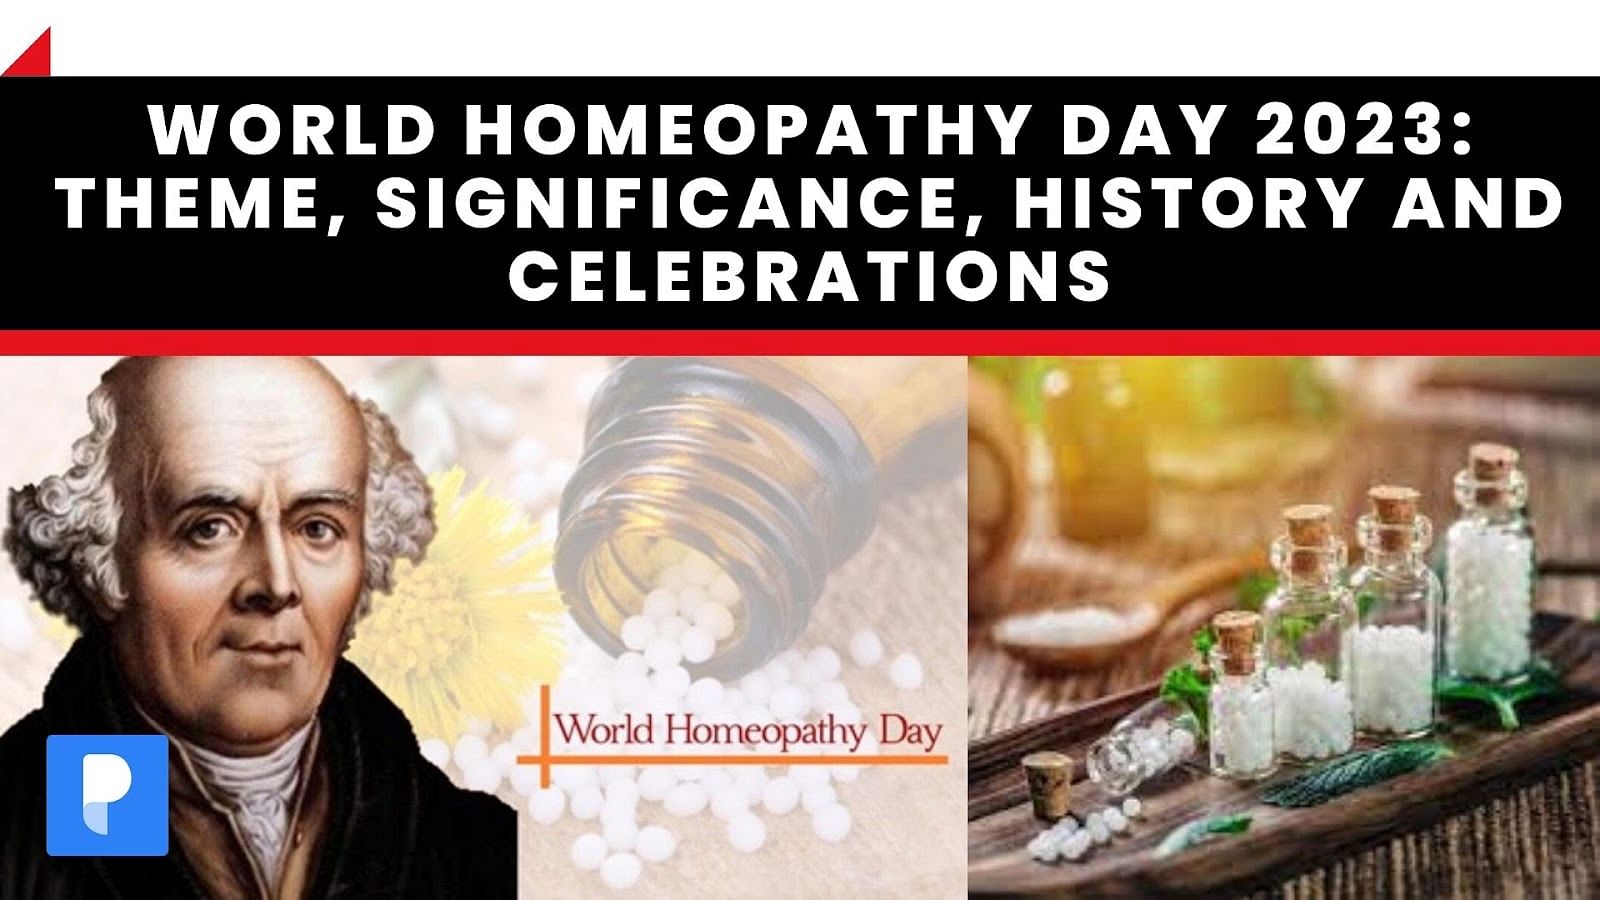 World Homeopathy Day 2023: Theme, Significance, History and Celebrations